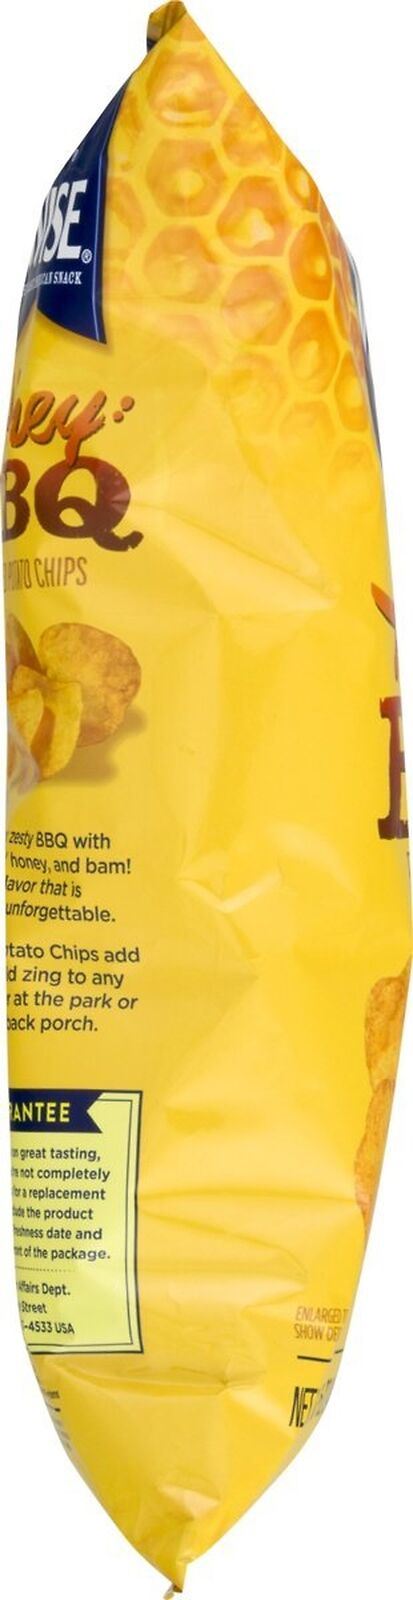 Wise Foods Honey BBQ Potato Chips, 3-Pack 7.5 oz. Bags